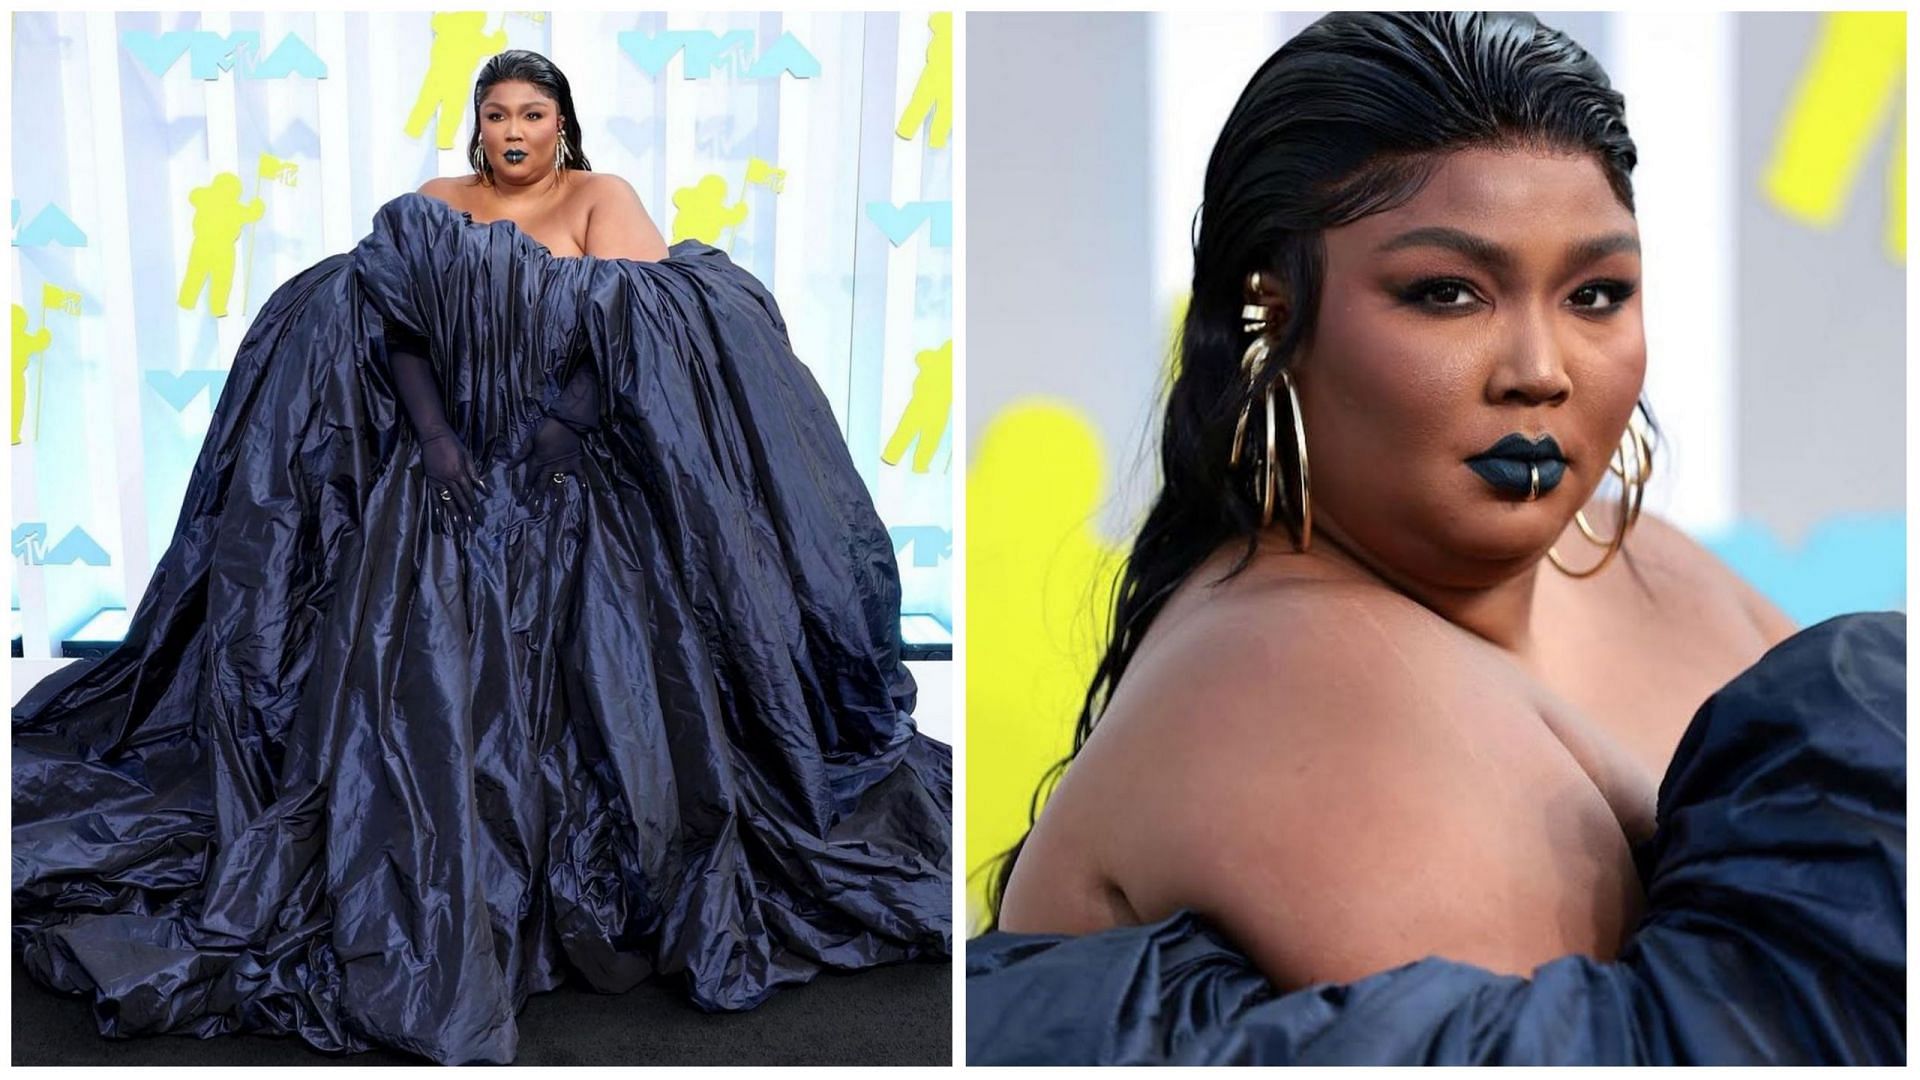 Lizzo clapped back at her haters and bullies while receiving her VMA award